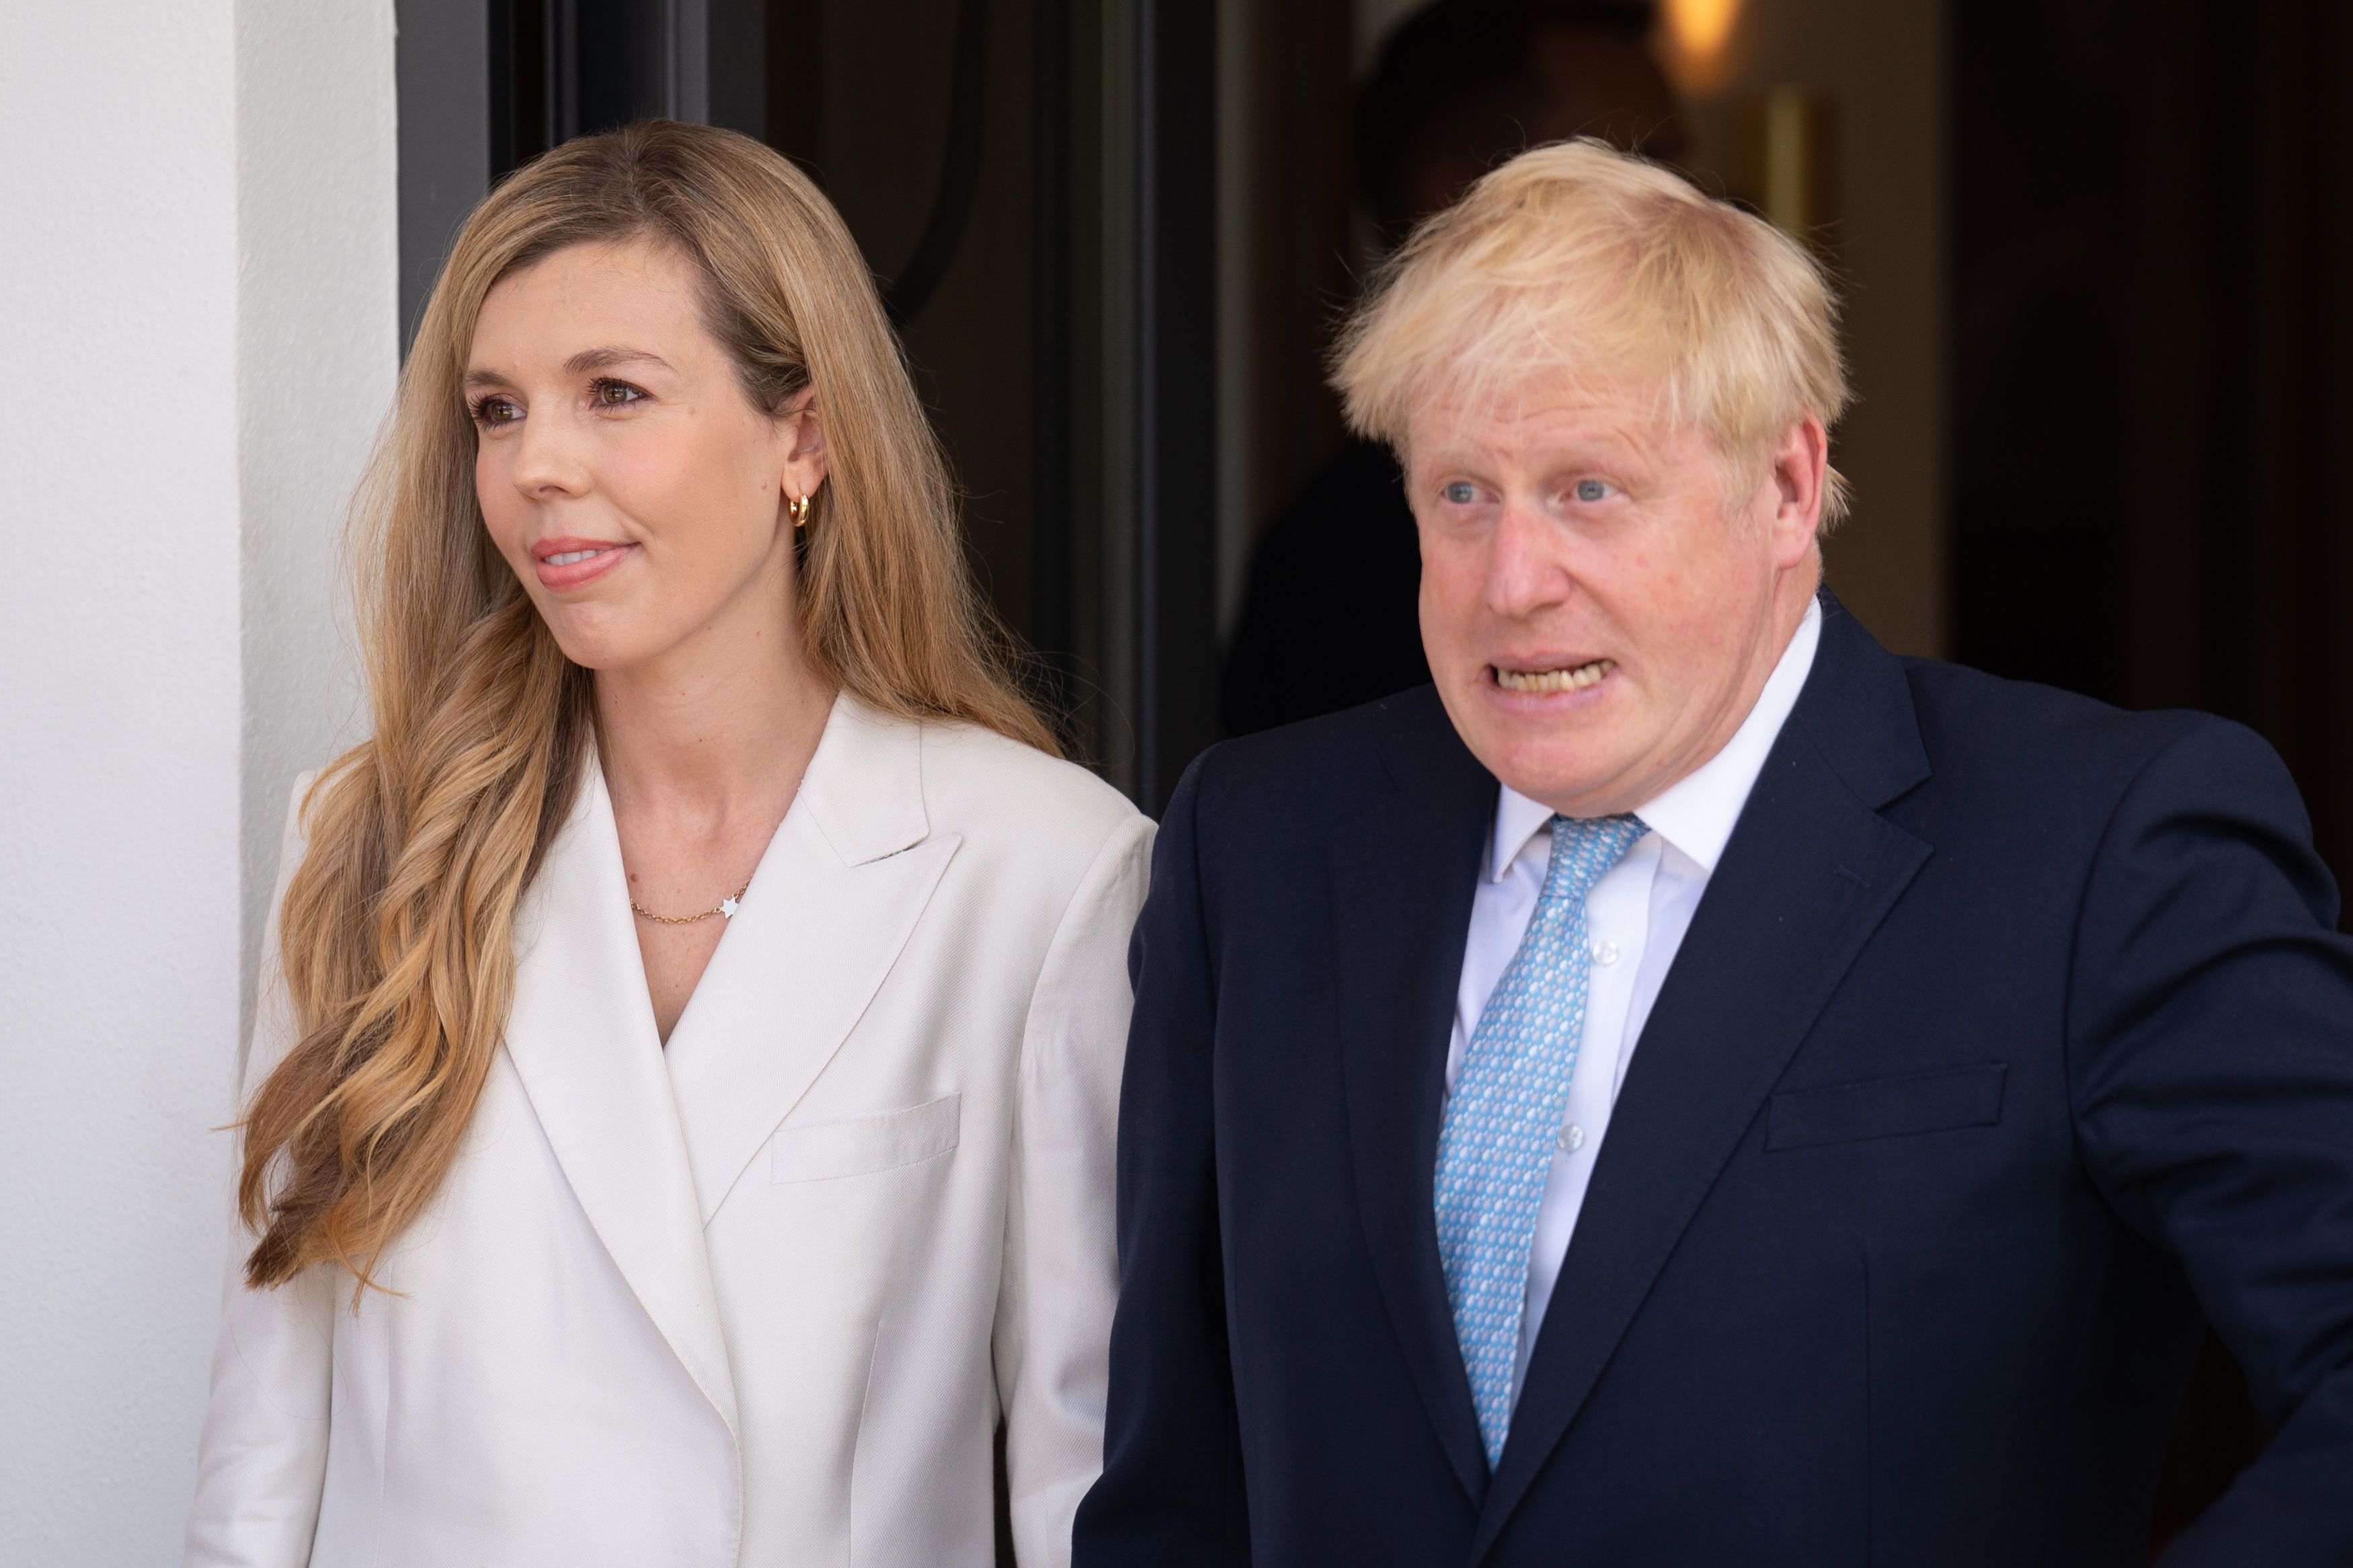 Boris Johnson and Carrie Symonds a relationship timeline photo image